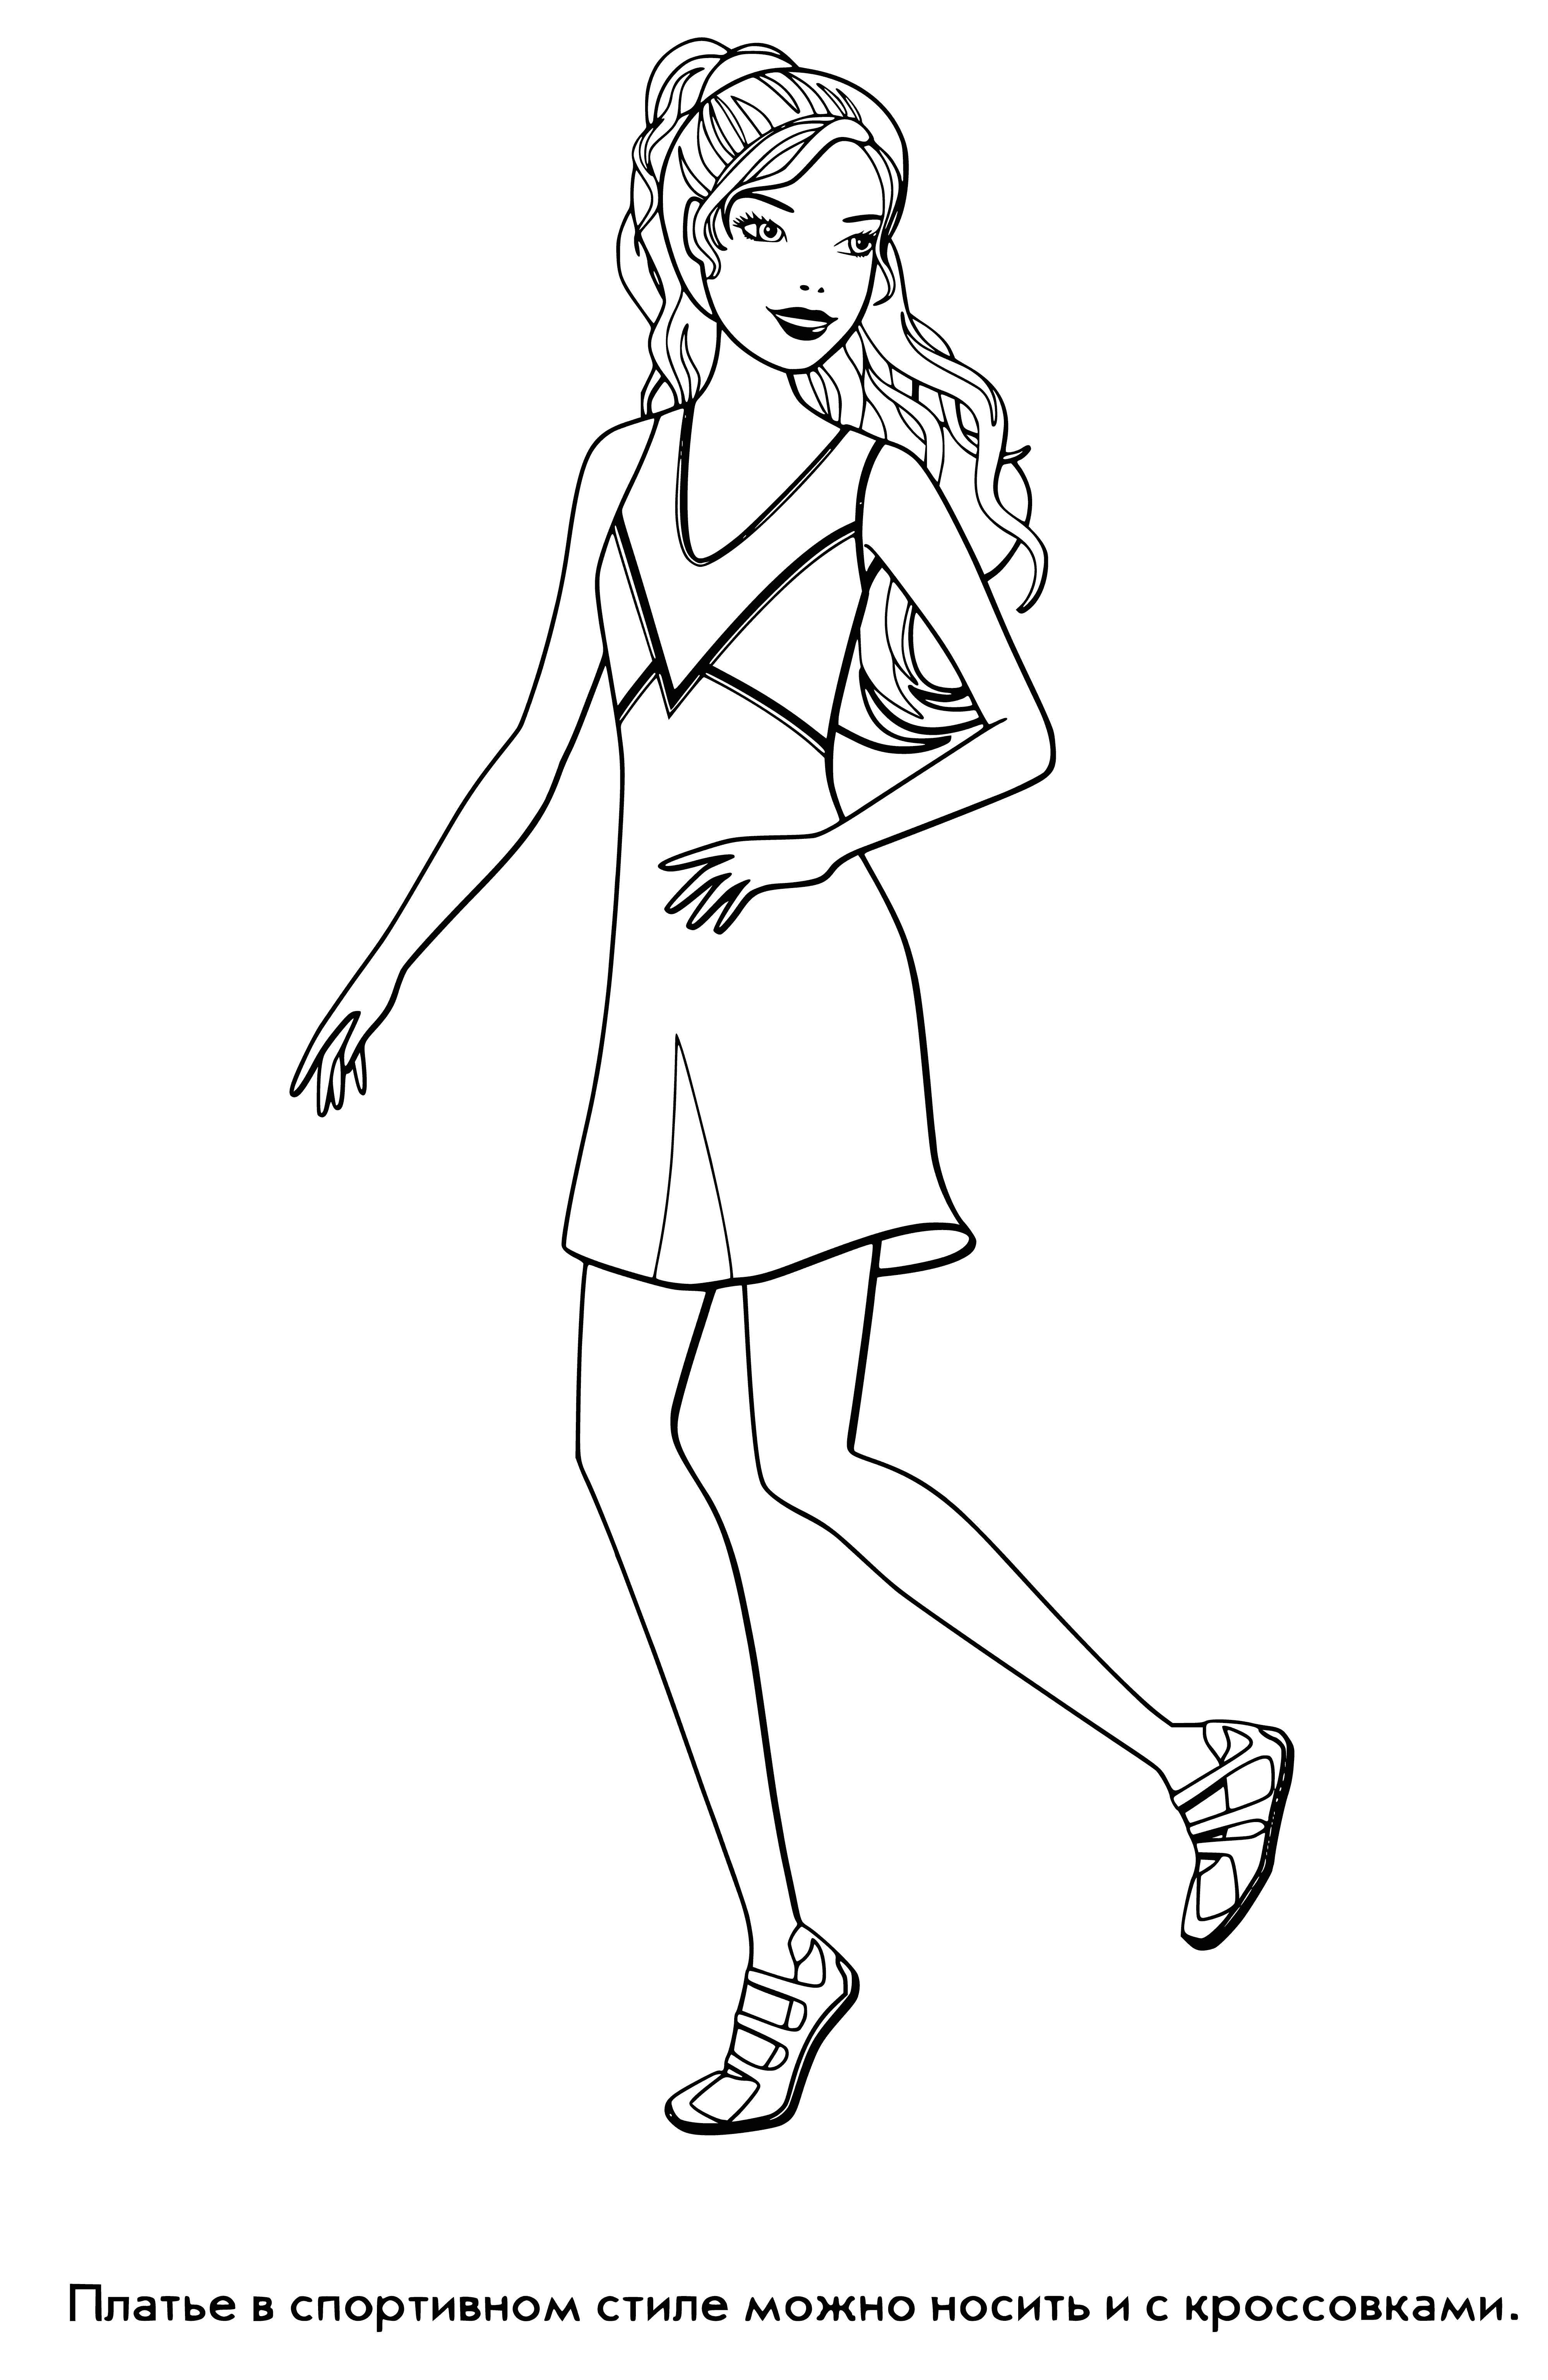 Sport dress coloring page